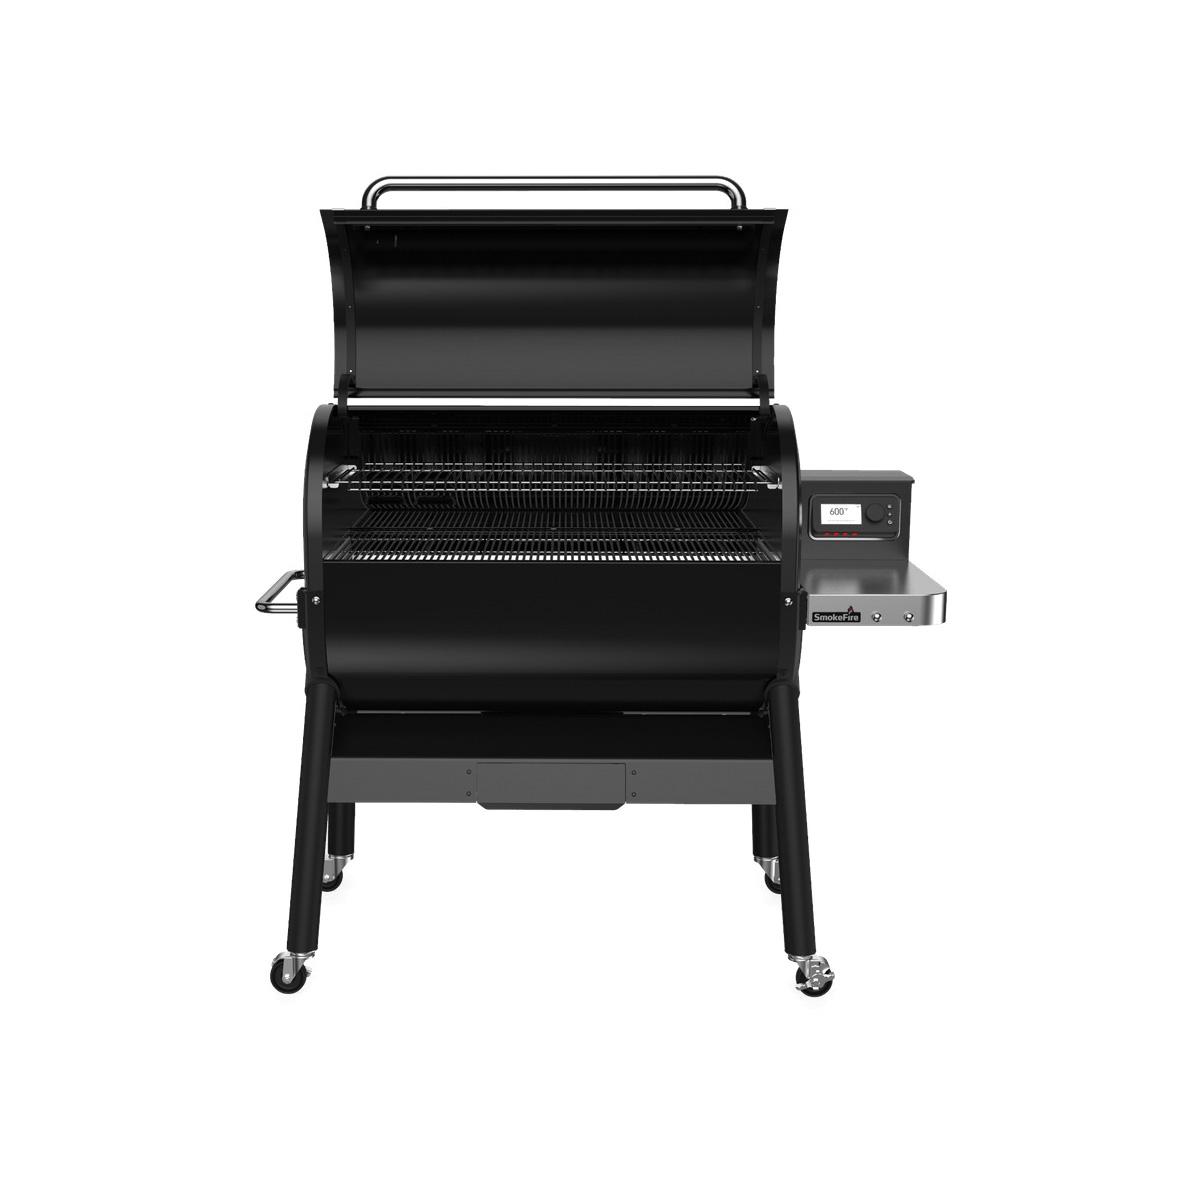 Weber SmokeFire 23510001 Pellet Grill, 1008 sq-in Primary Cooking Surface, Side Shelf Included: Yes, Steel Body, Black - 4